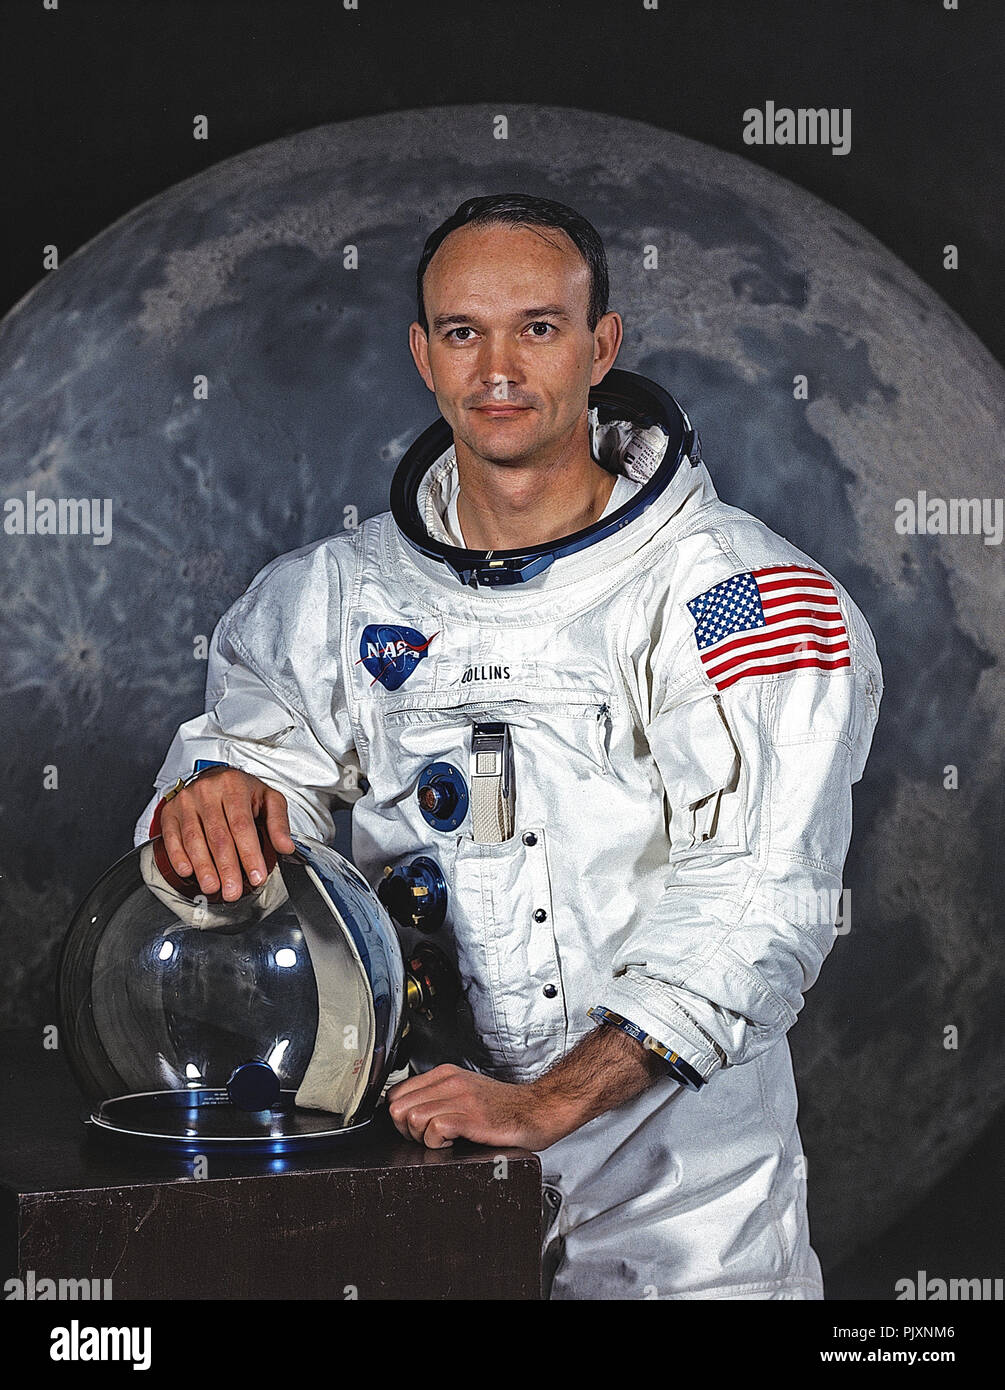 Houston, TX - File photo -- Portrait of Michael Collins, Command Module (CM) Pilot of Apollo 11 Lunar Landing Mission taken on May 1, 1969.  Apollo 11 was Collins' second and final trip to space.  He previously piloted the Gemini 10 mission on July 18, 1966.  On that mission Collins completed two periods of extravehicular activity (EVA).  Apollo 11 launched on July 16, 1969.  Collins remained in Lunar orbit aboard the CM 'Columbia', while his crew mates Neil Armstrong and Buzz Aldrin landed on the Moon. Credit: NASA via CNP /MediaPunch Stock Photo